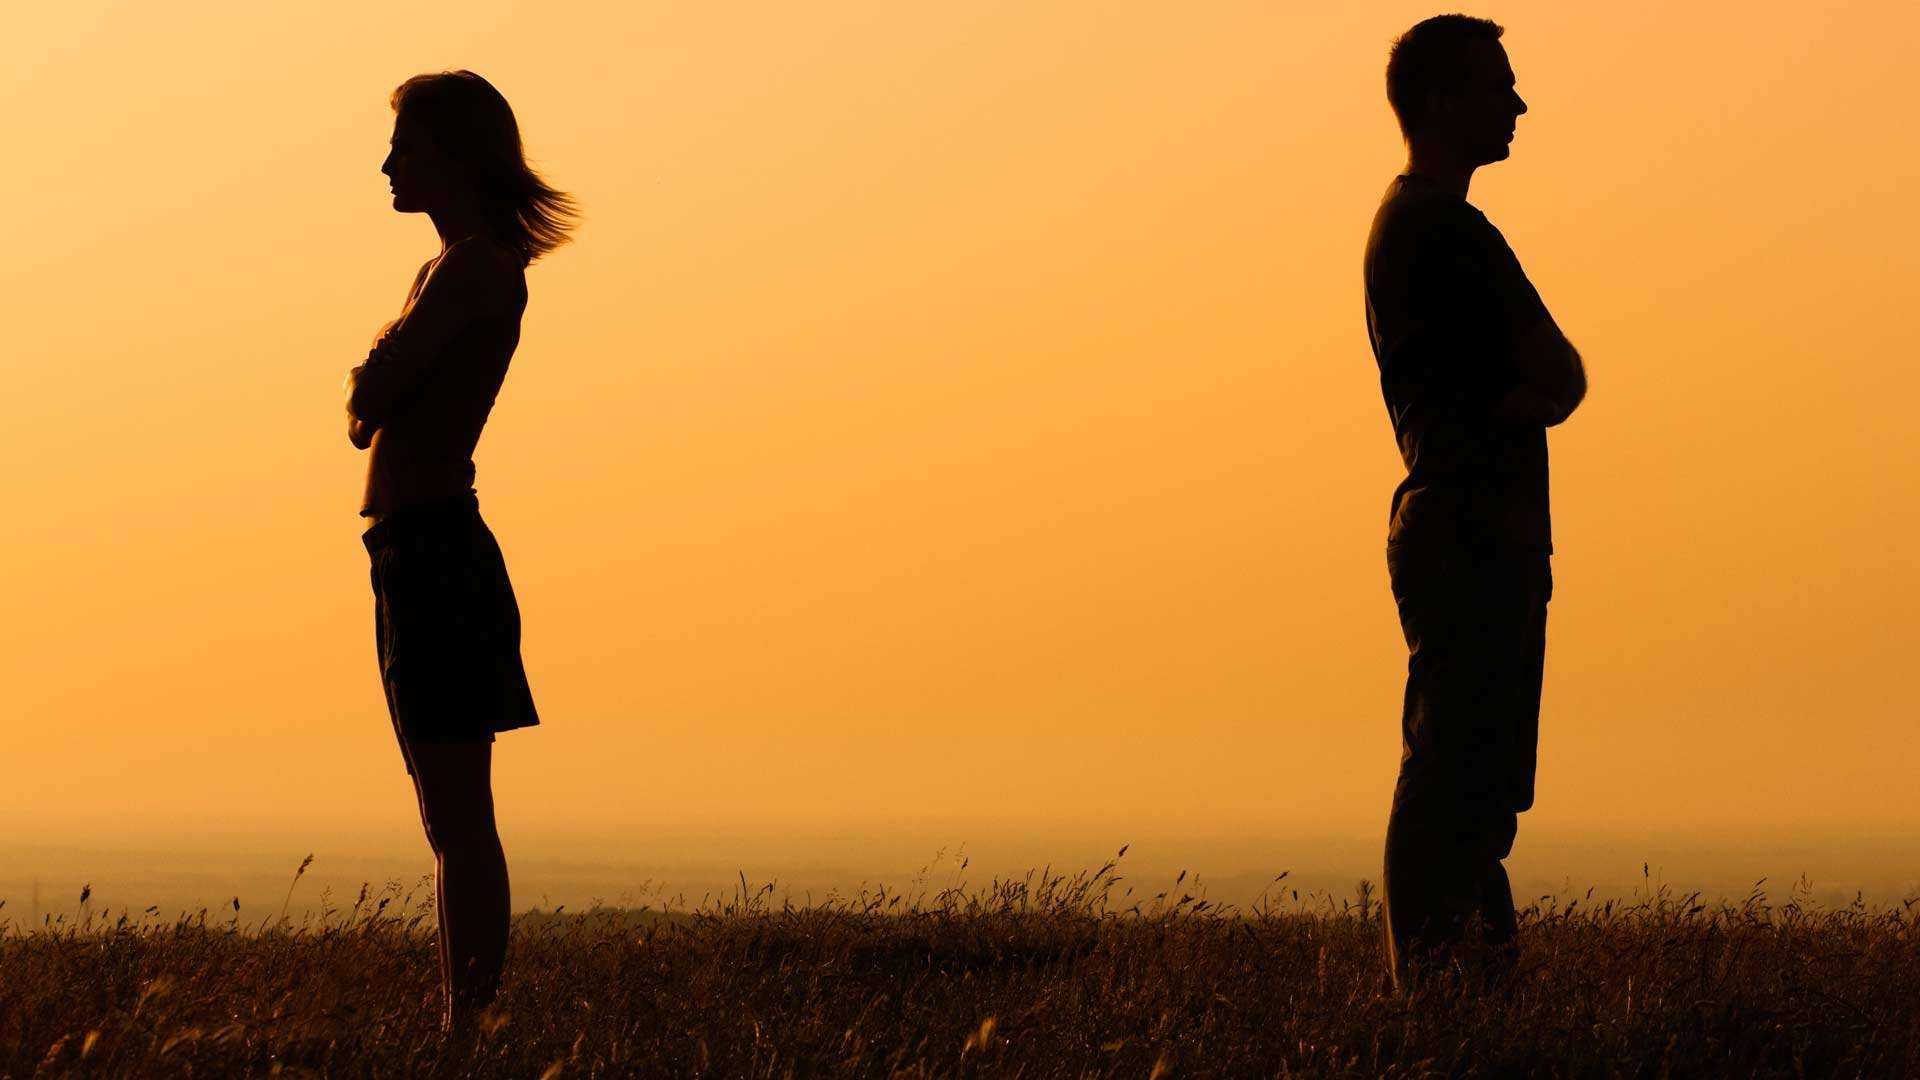 How Much Does Divorce Impact Emotional Security?